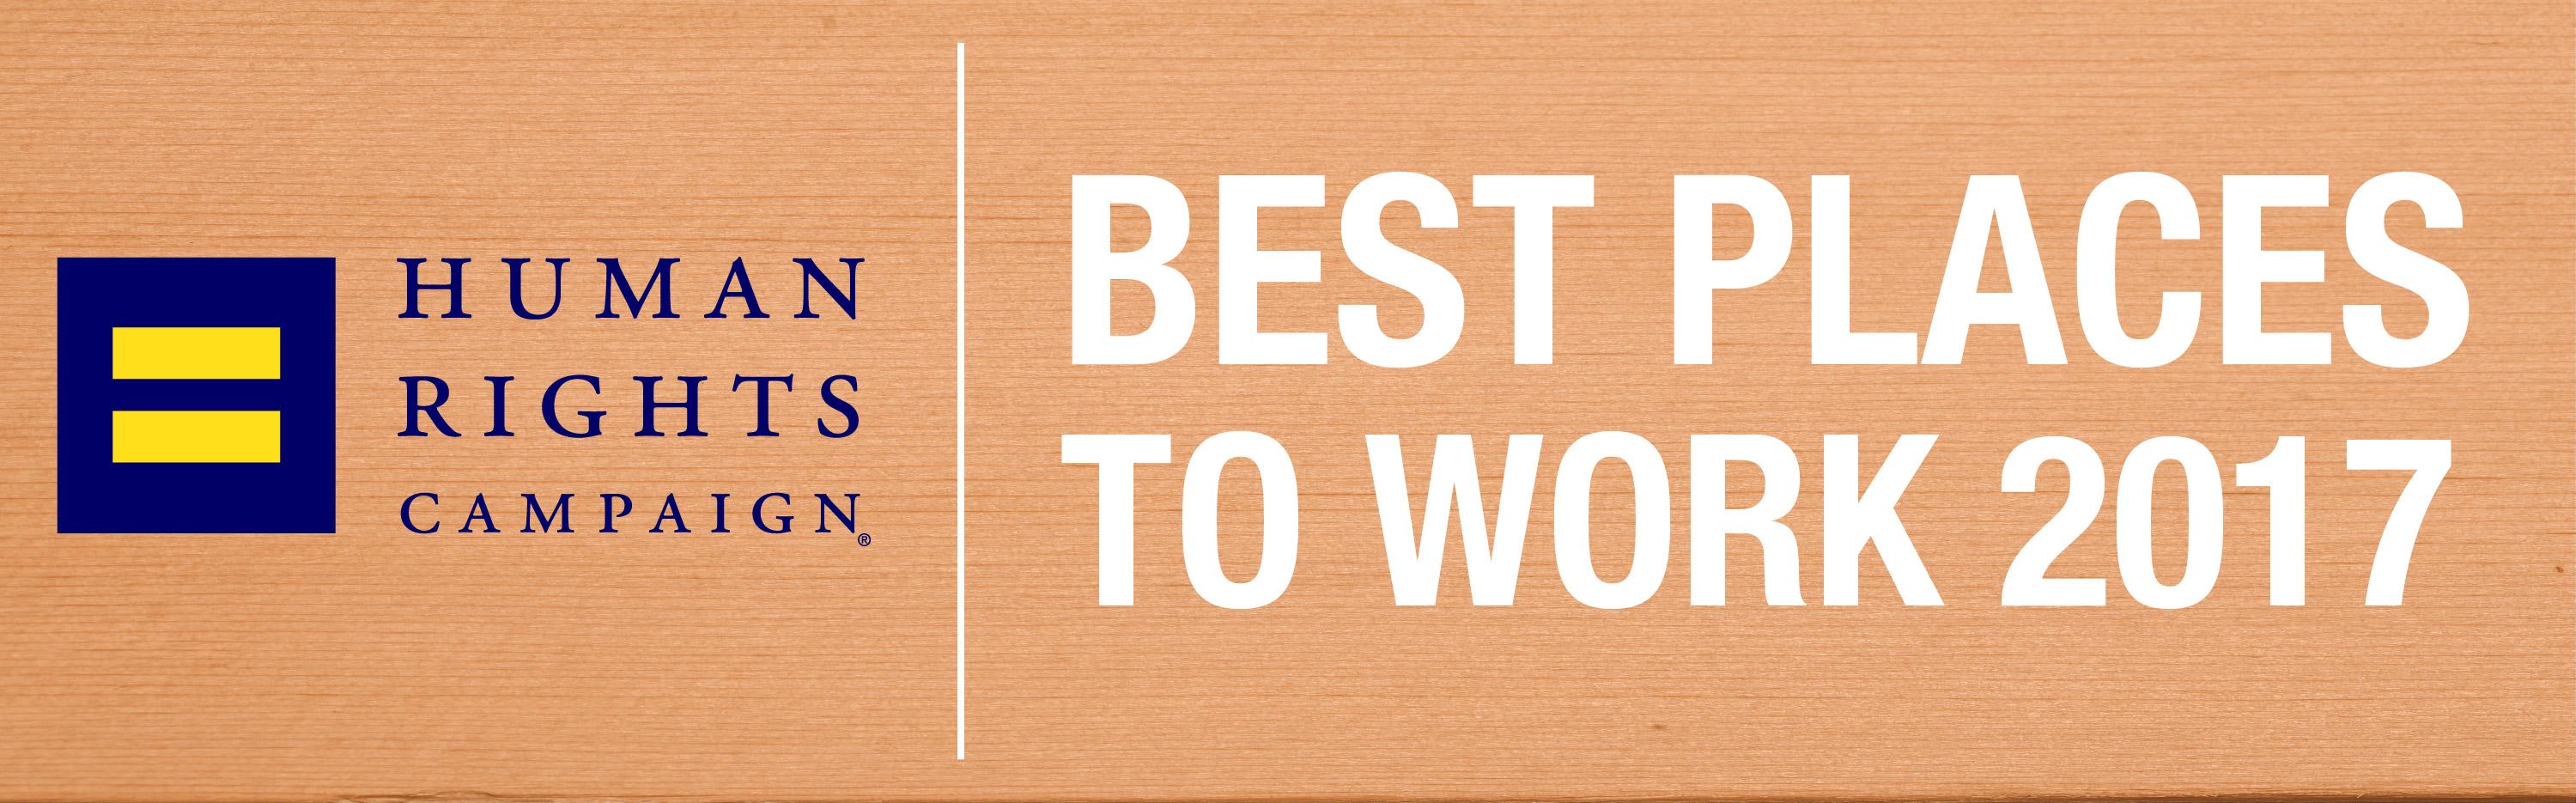 Human Rights Campaign Best Place to Work